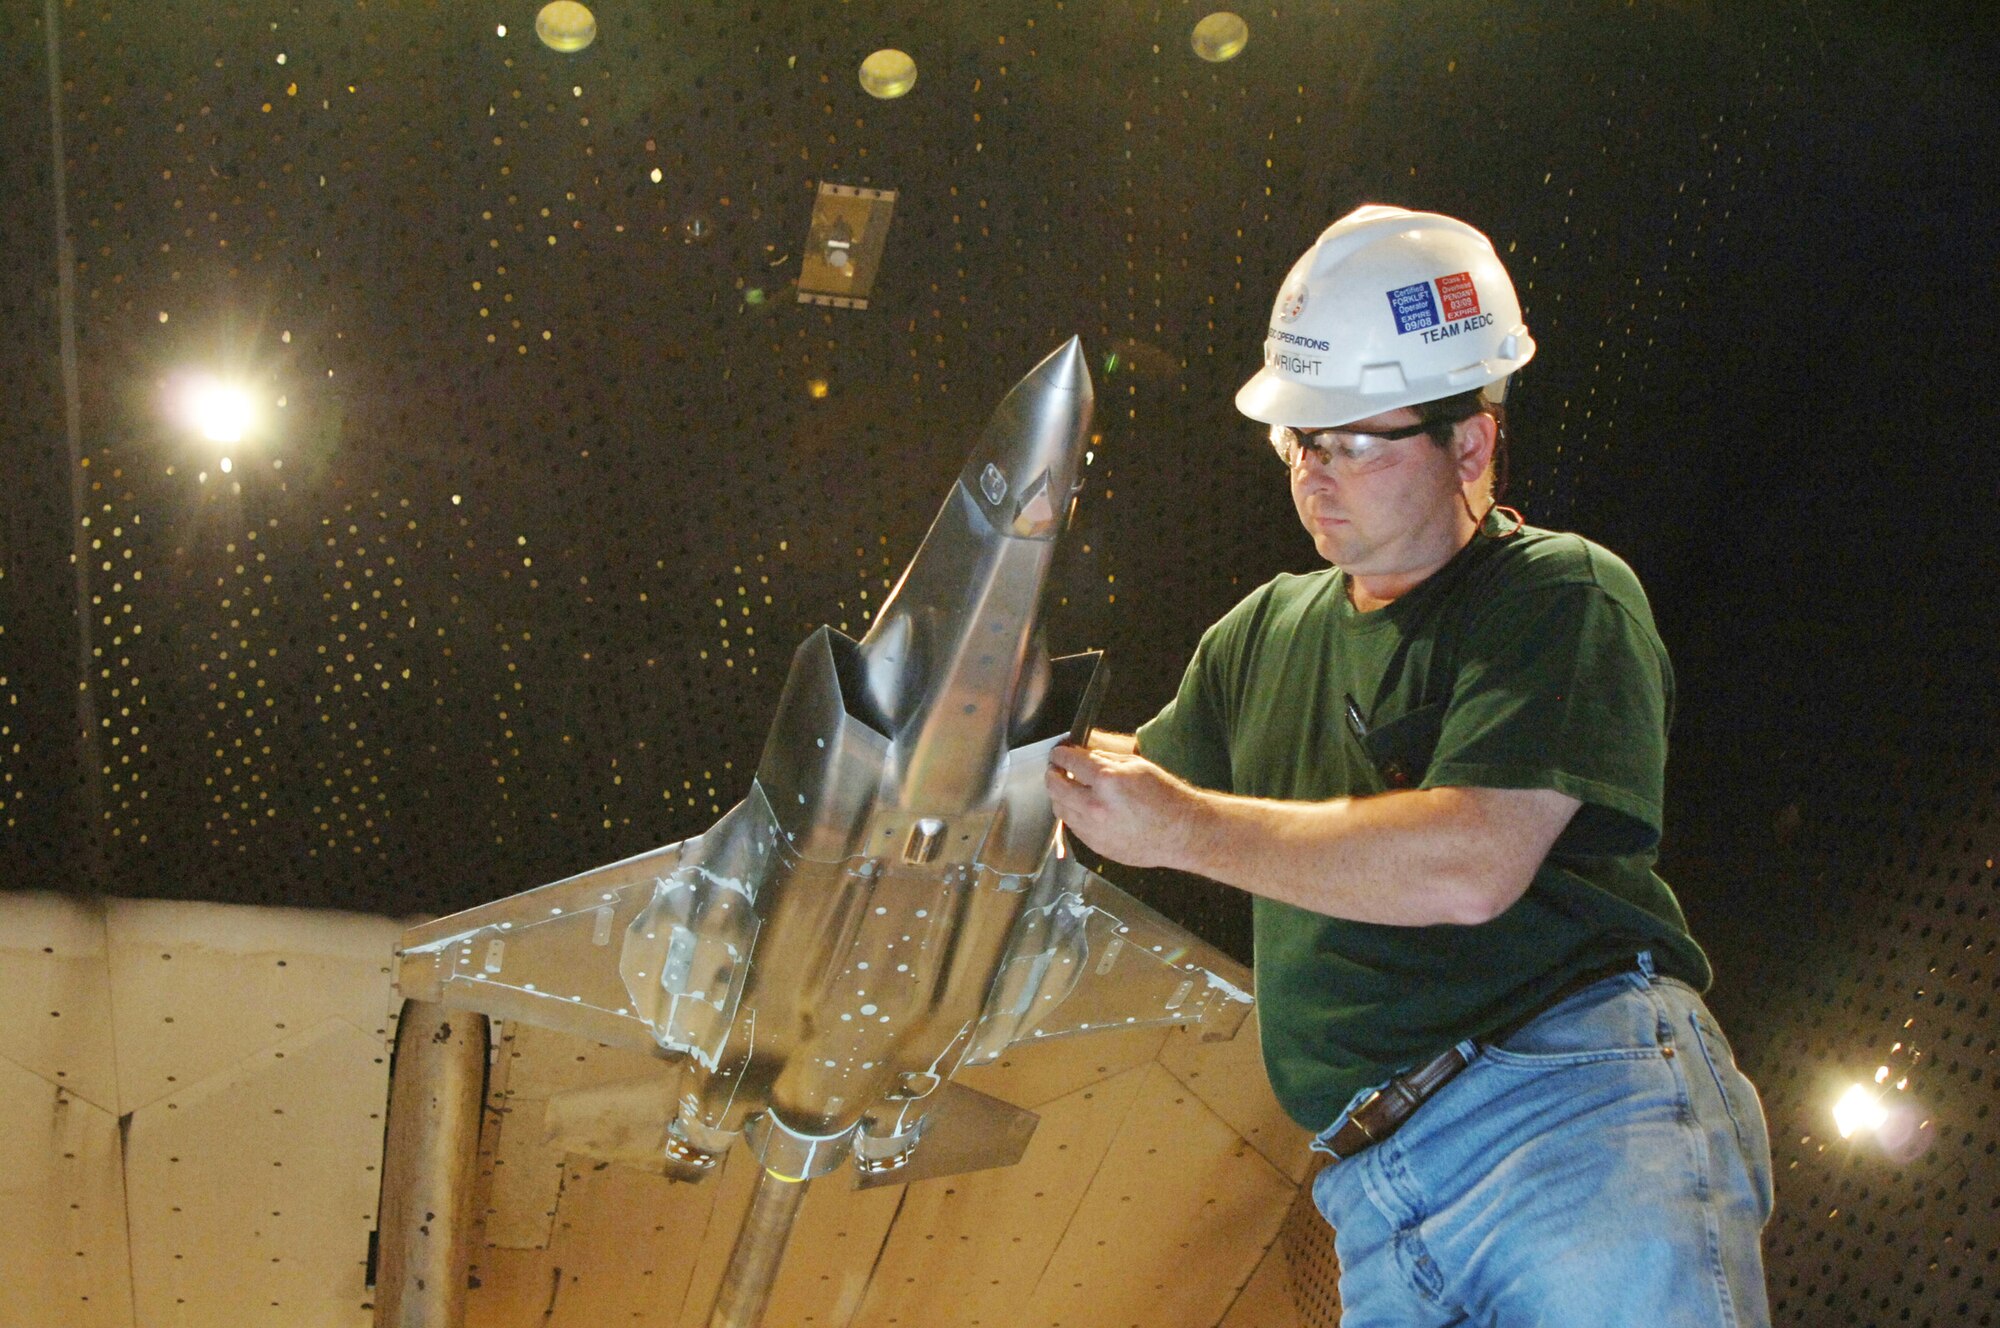 Tim Wright, an Aerospace Testing Alliance craftsman at AEDC, examines the Short Takeoff/Vertical Landing (STOVL) F-35 model in the 16 –foot transonic wind tunnel during a model change. The information from this testing, the final entry in a series of tests, will go into a large database to refine and validate the aircraft designs for flight testing and ultimately, production of the CTOL and STOVL F-35 variants.